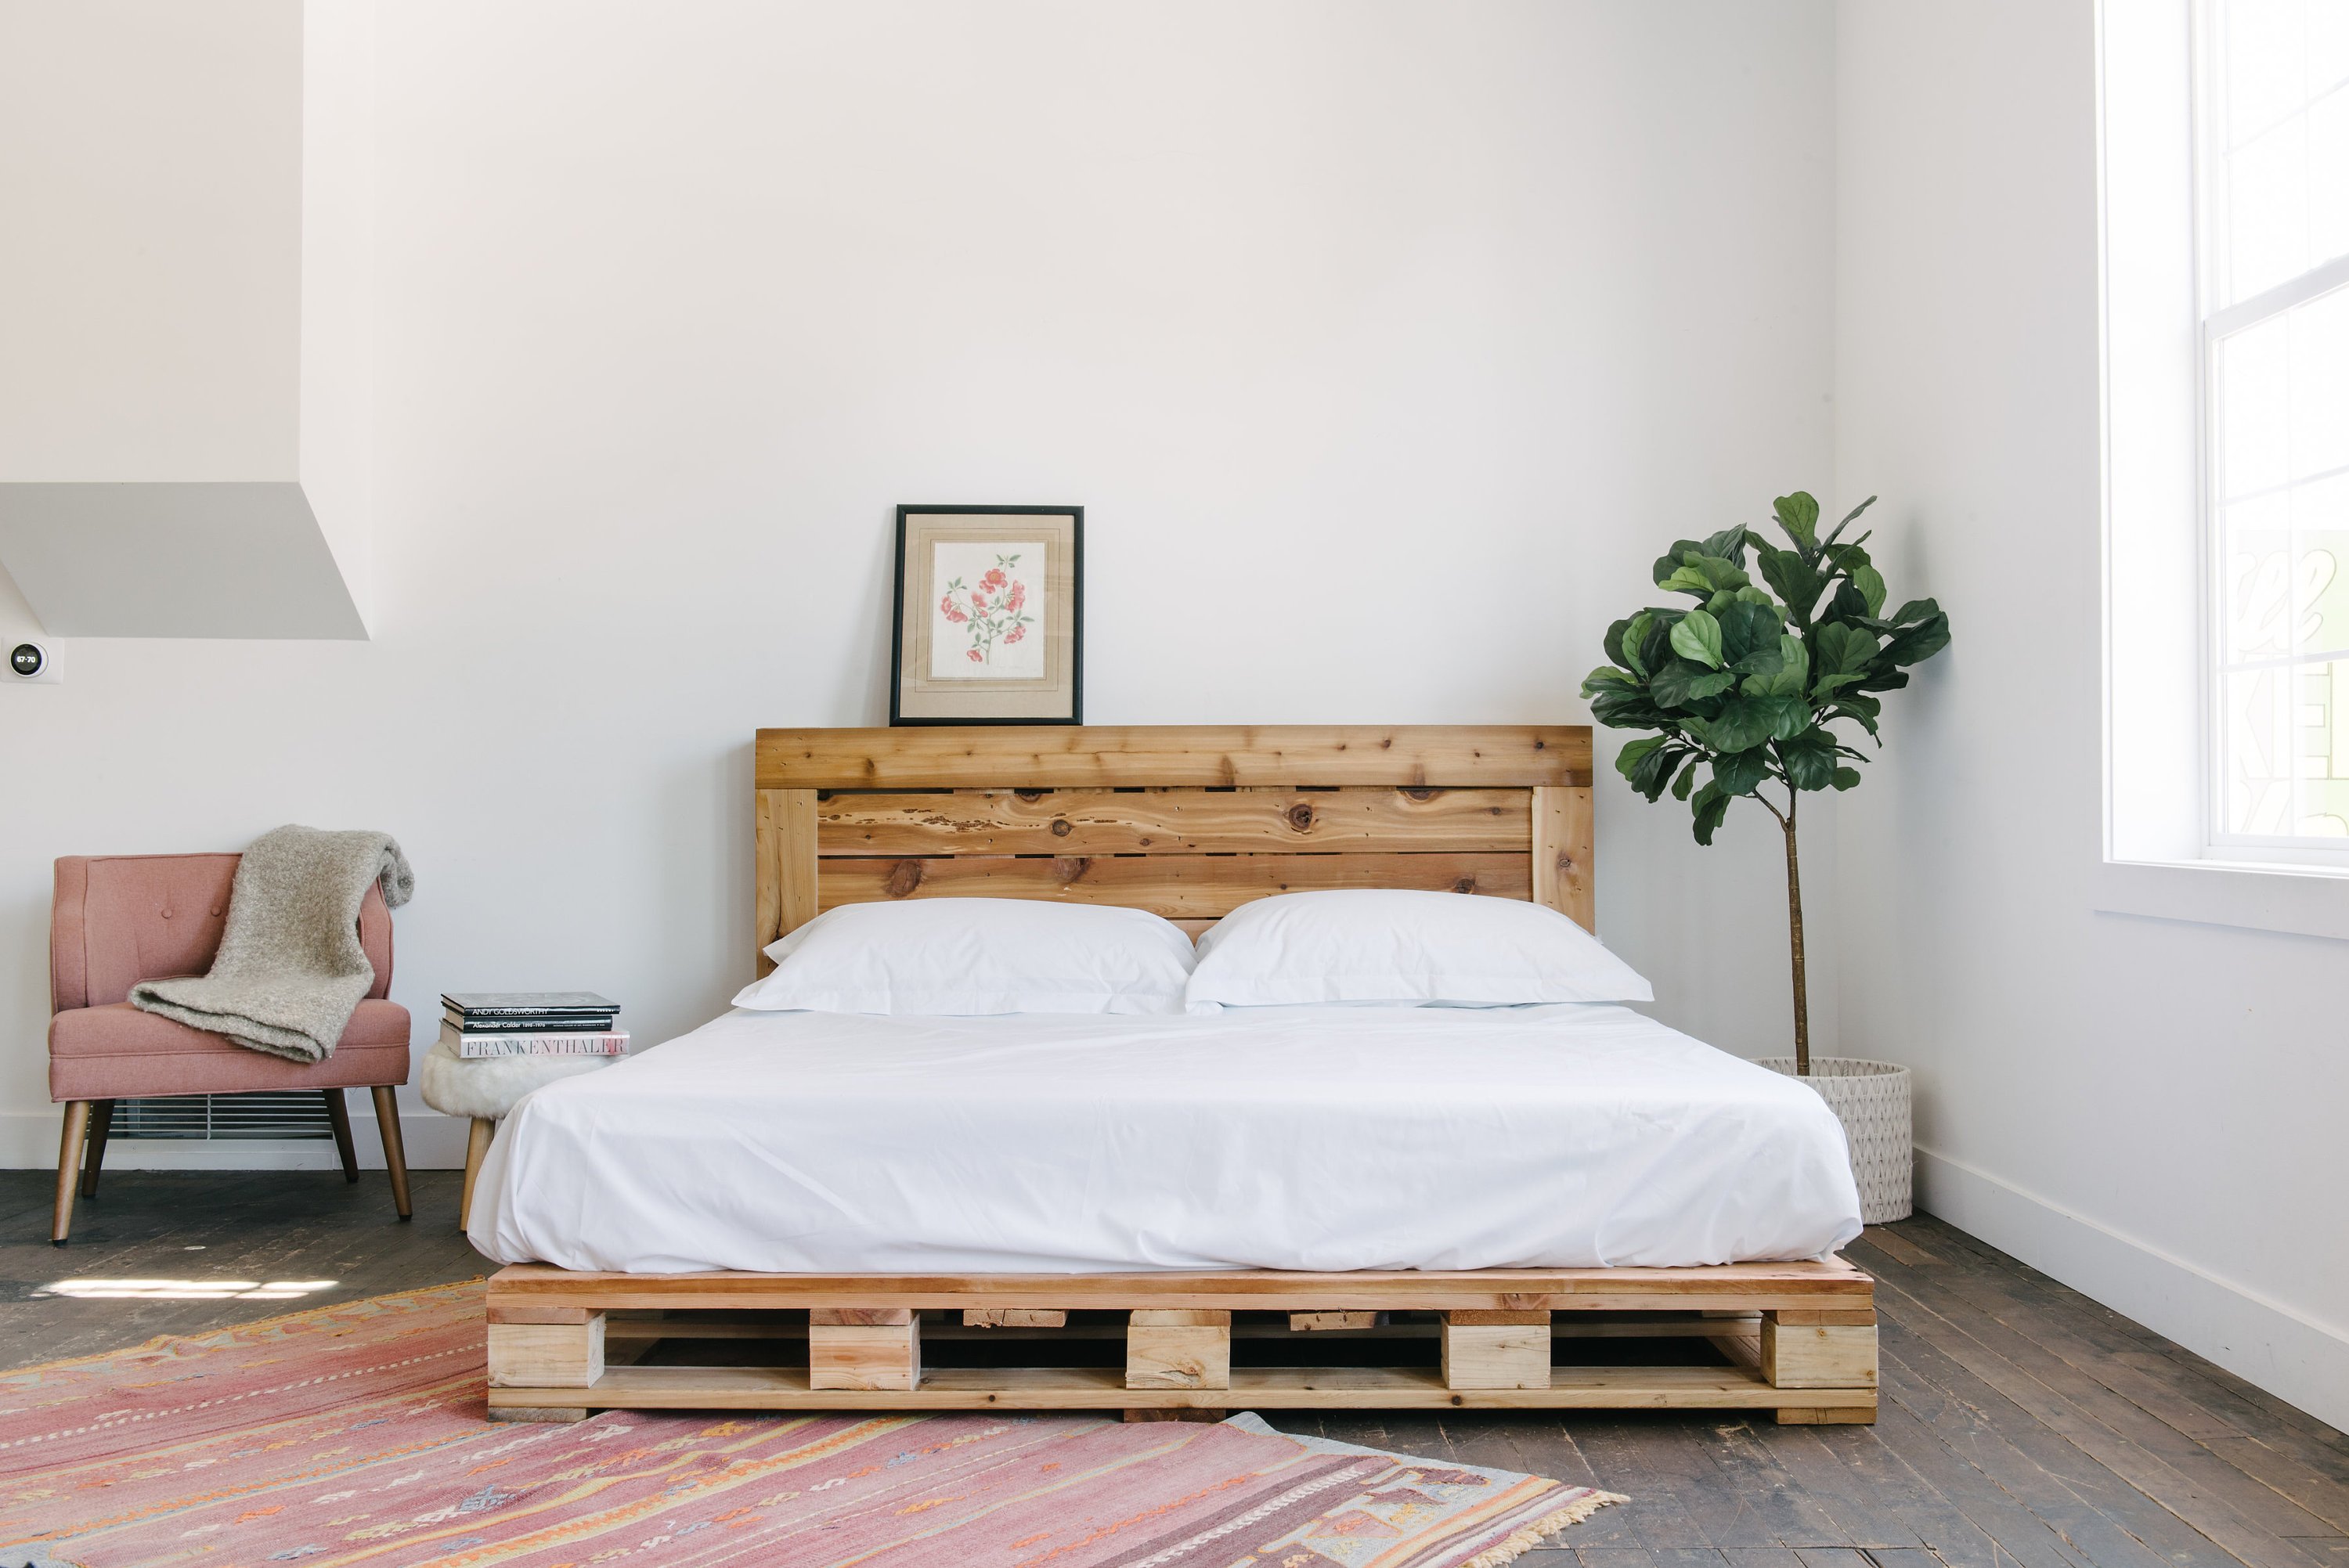 Lake Taupo ritme ziekenhuis Read This Before Getting a Pallet Bed | Hunker